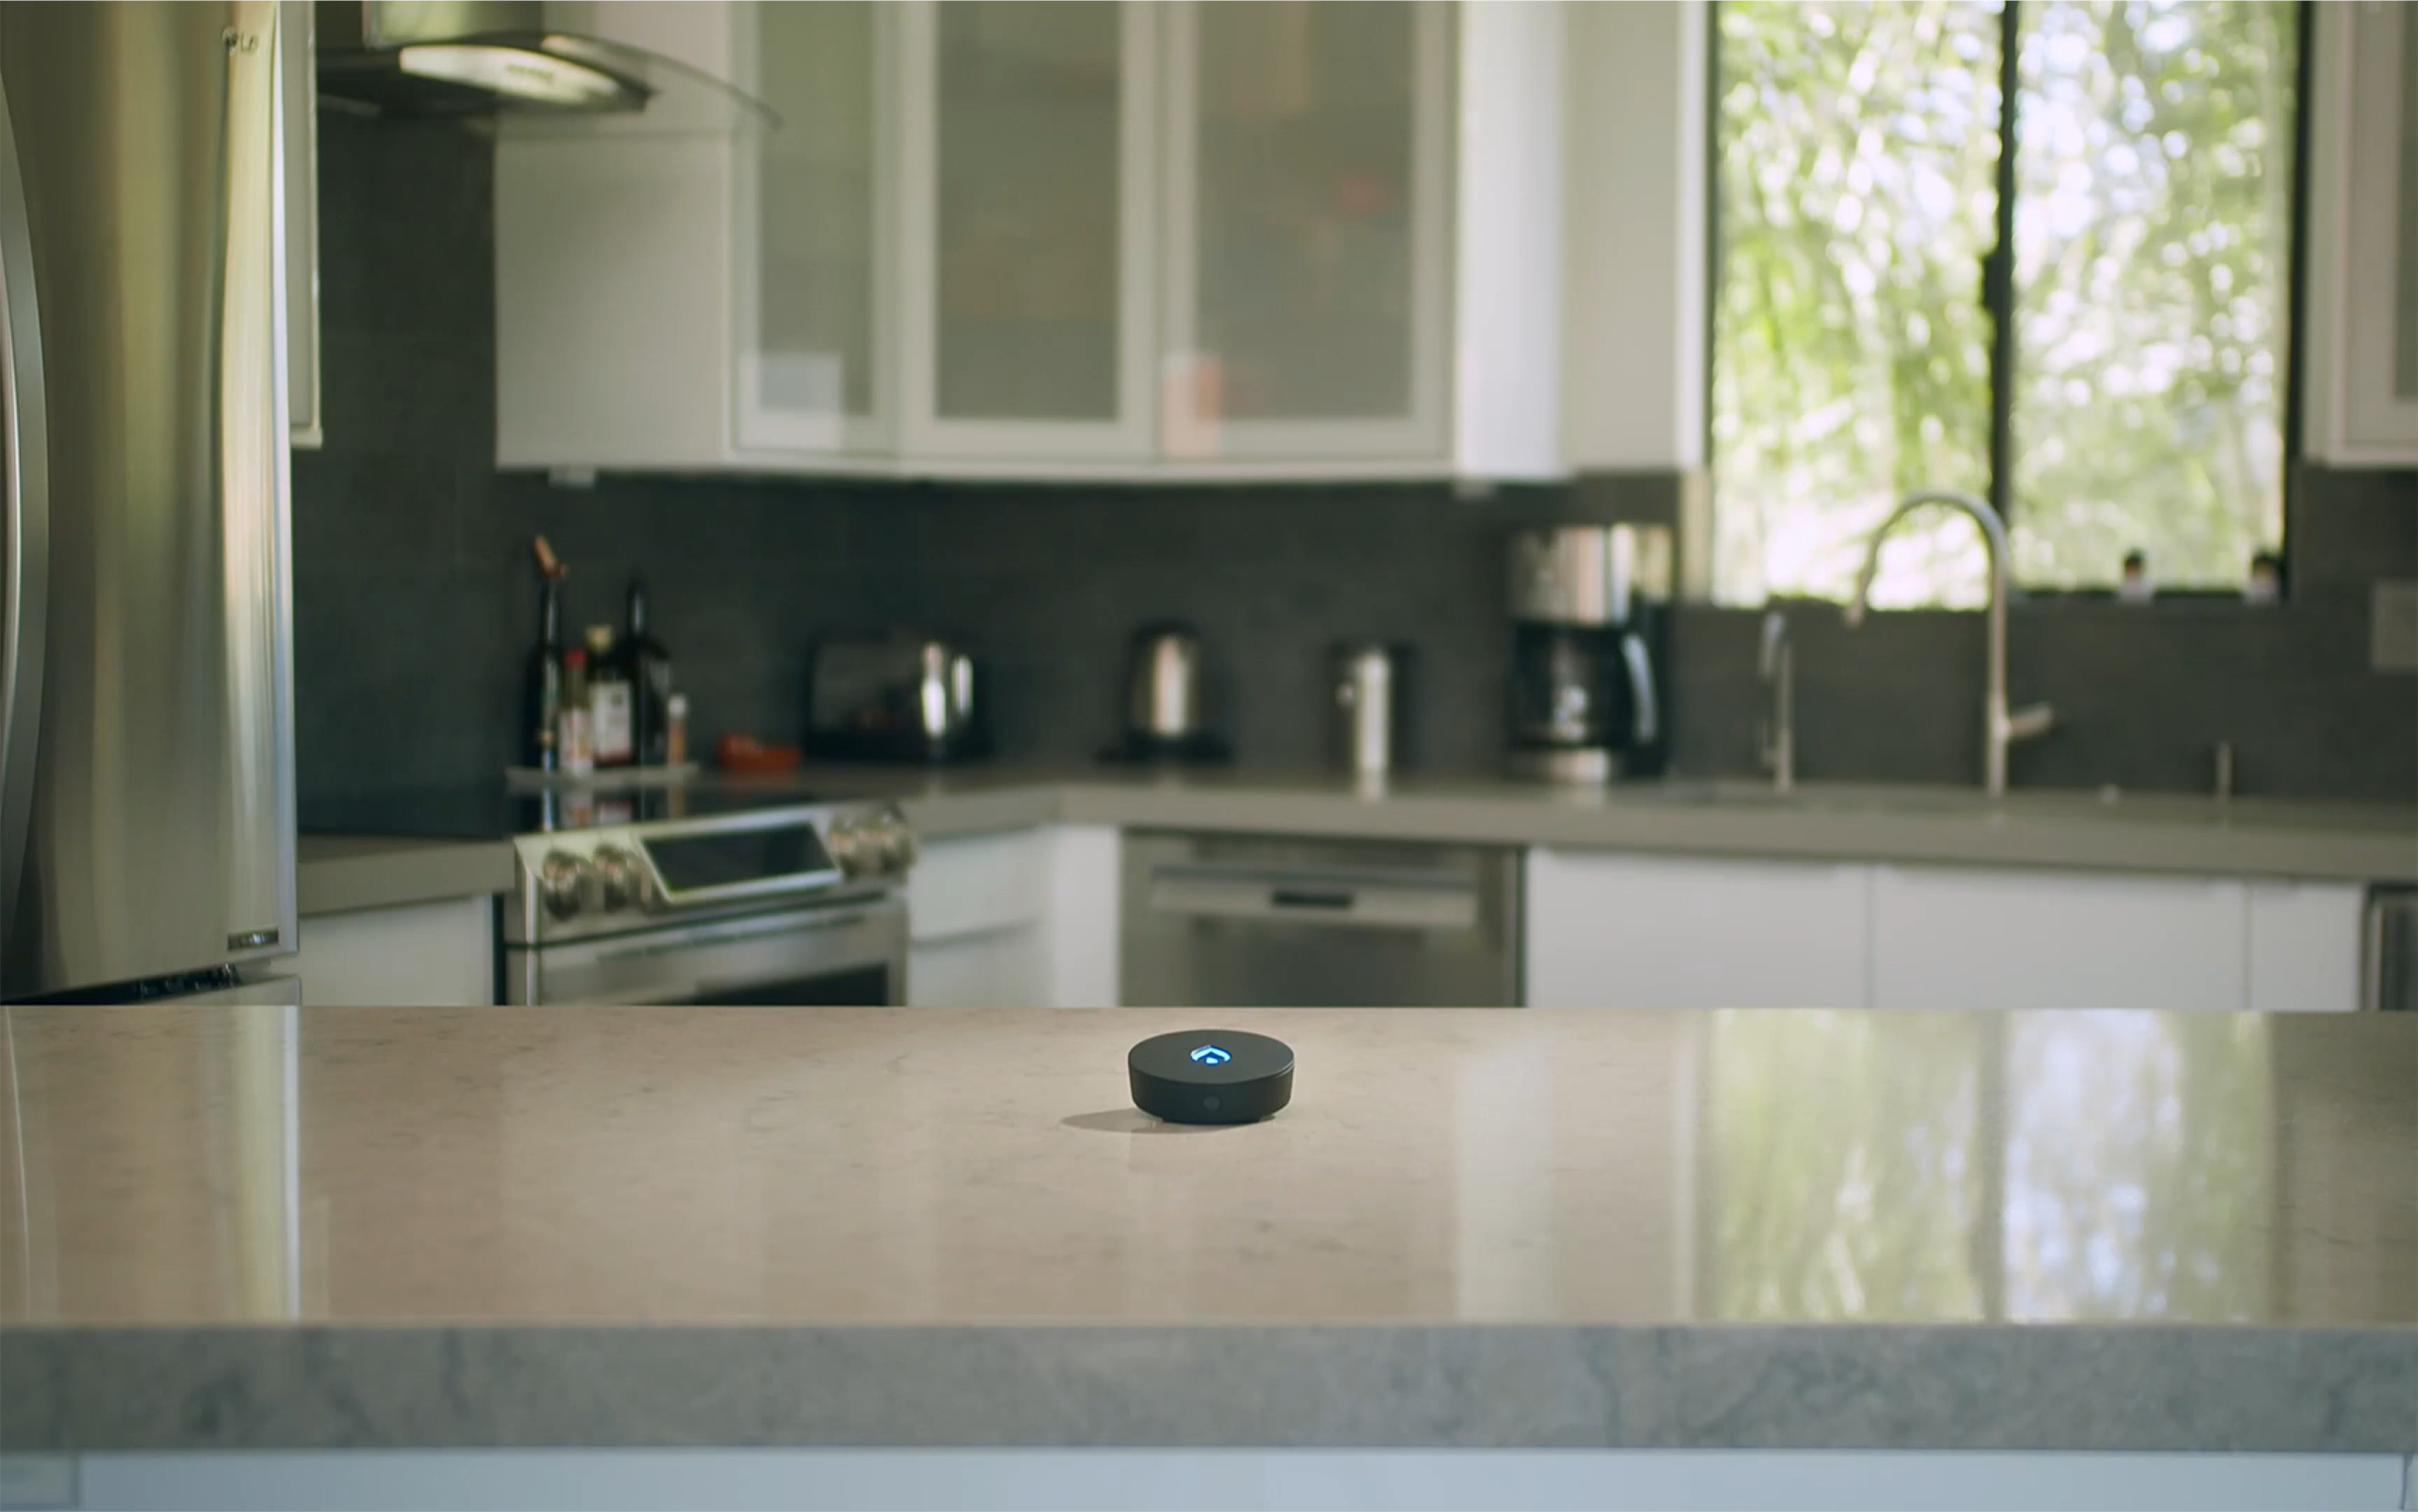 A Phyn water sensor sitting on a kitchen counter